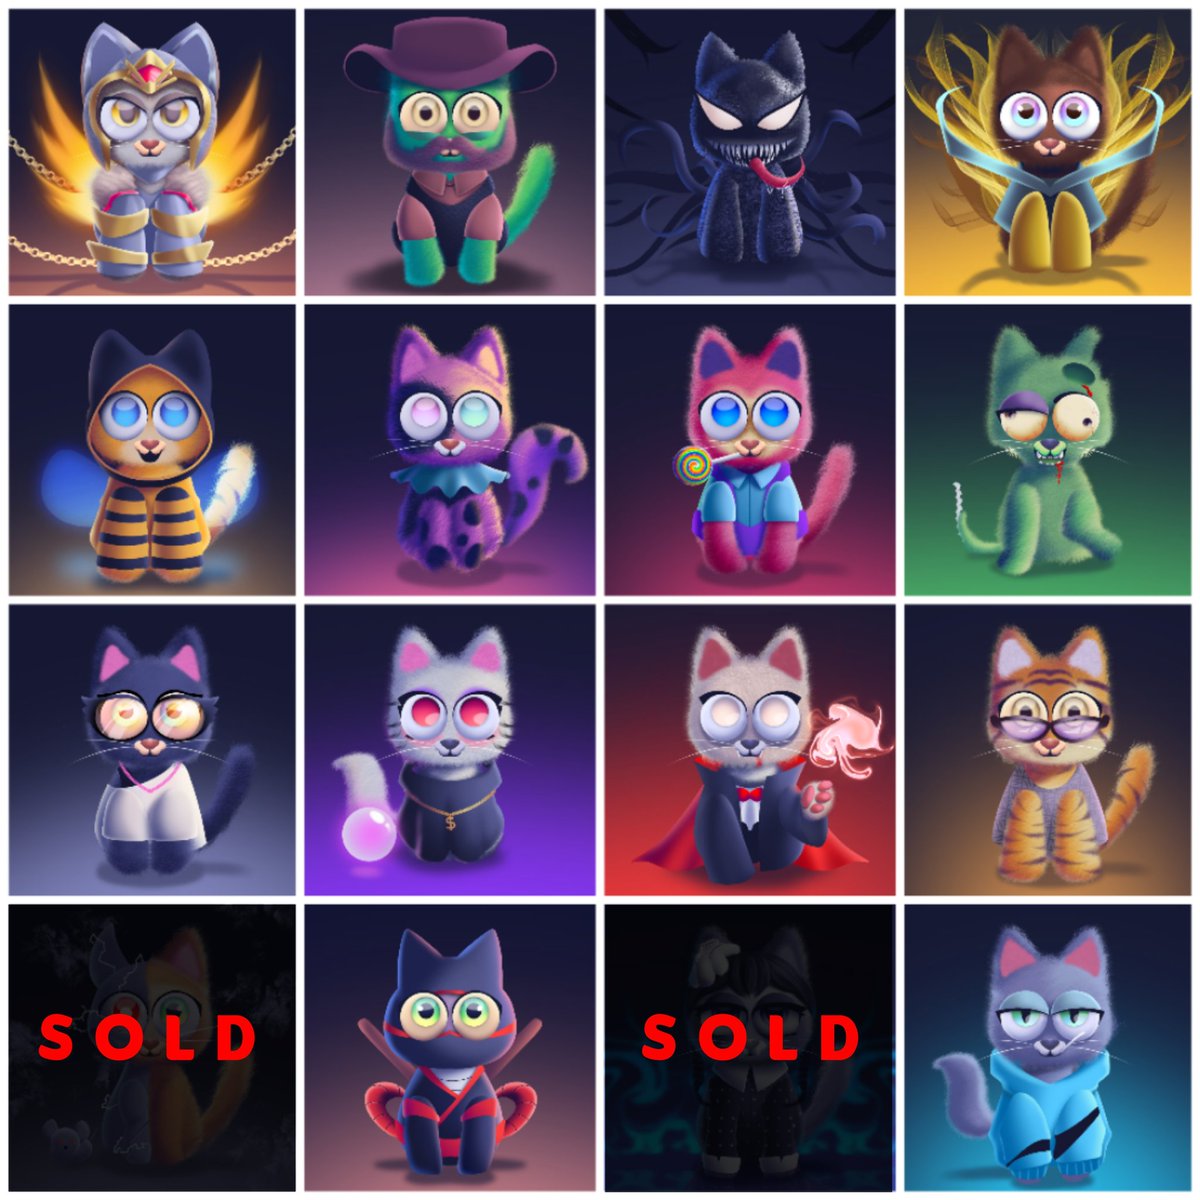 LISTED NOW!🔥
Cateezz available on opensea 🐱
ERC-721 Polygon Blockchain
FP - 0.0045 ETH 
18 CATZ ready for adopt🥰

CATZ collection adopt here ⤵
opensea.io/collection/cat…

#NFTCommunity #NFTgang #NFTartists